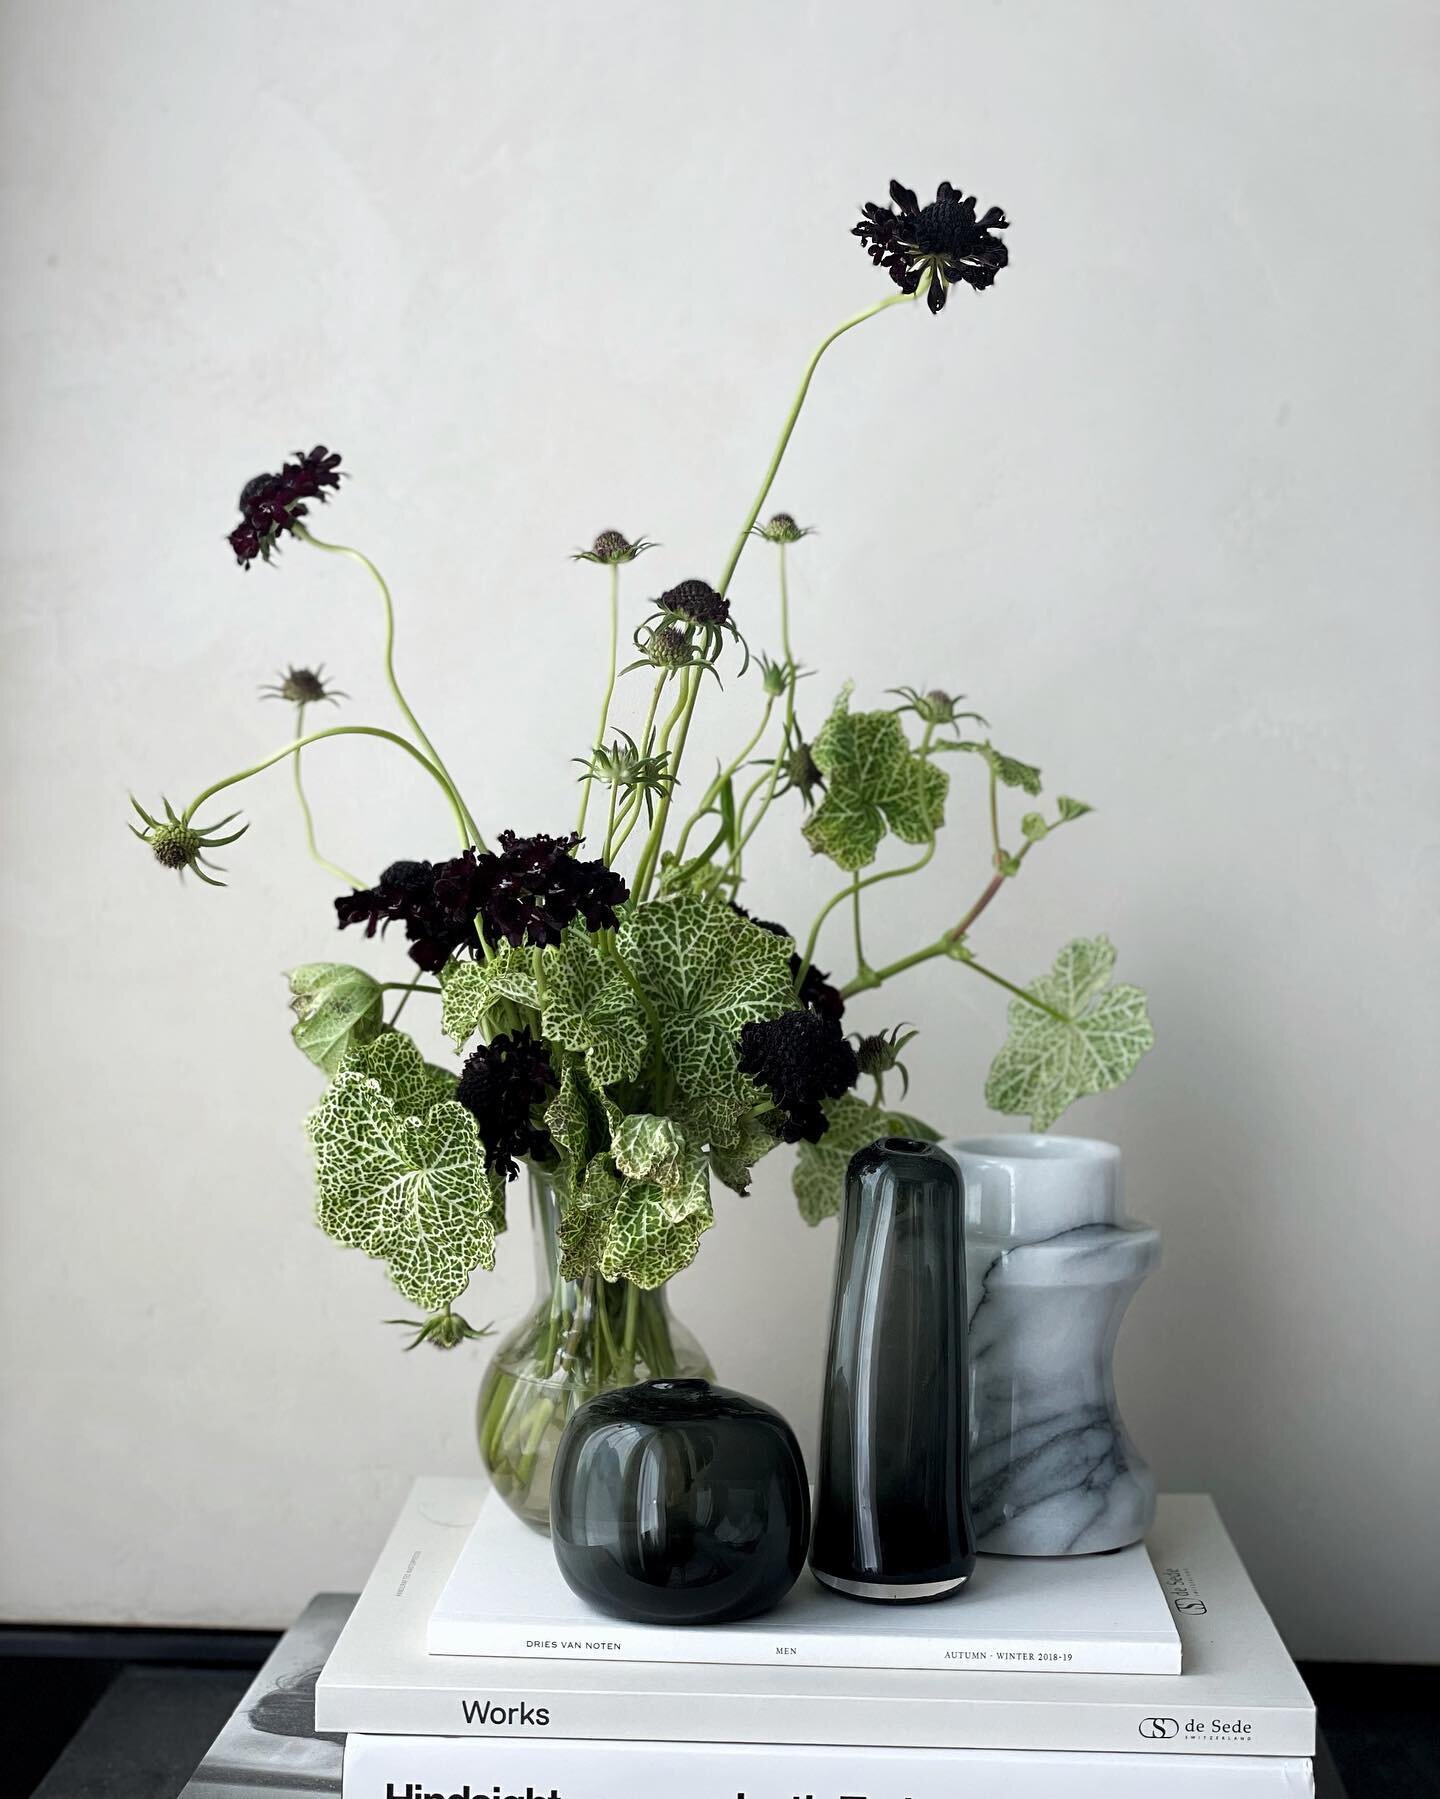 Abstract and wild, geranium and scabiosa. #design #interiors